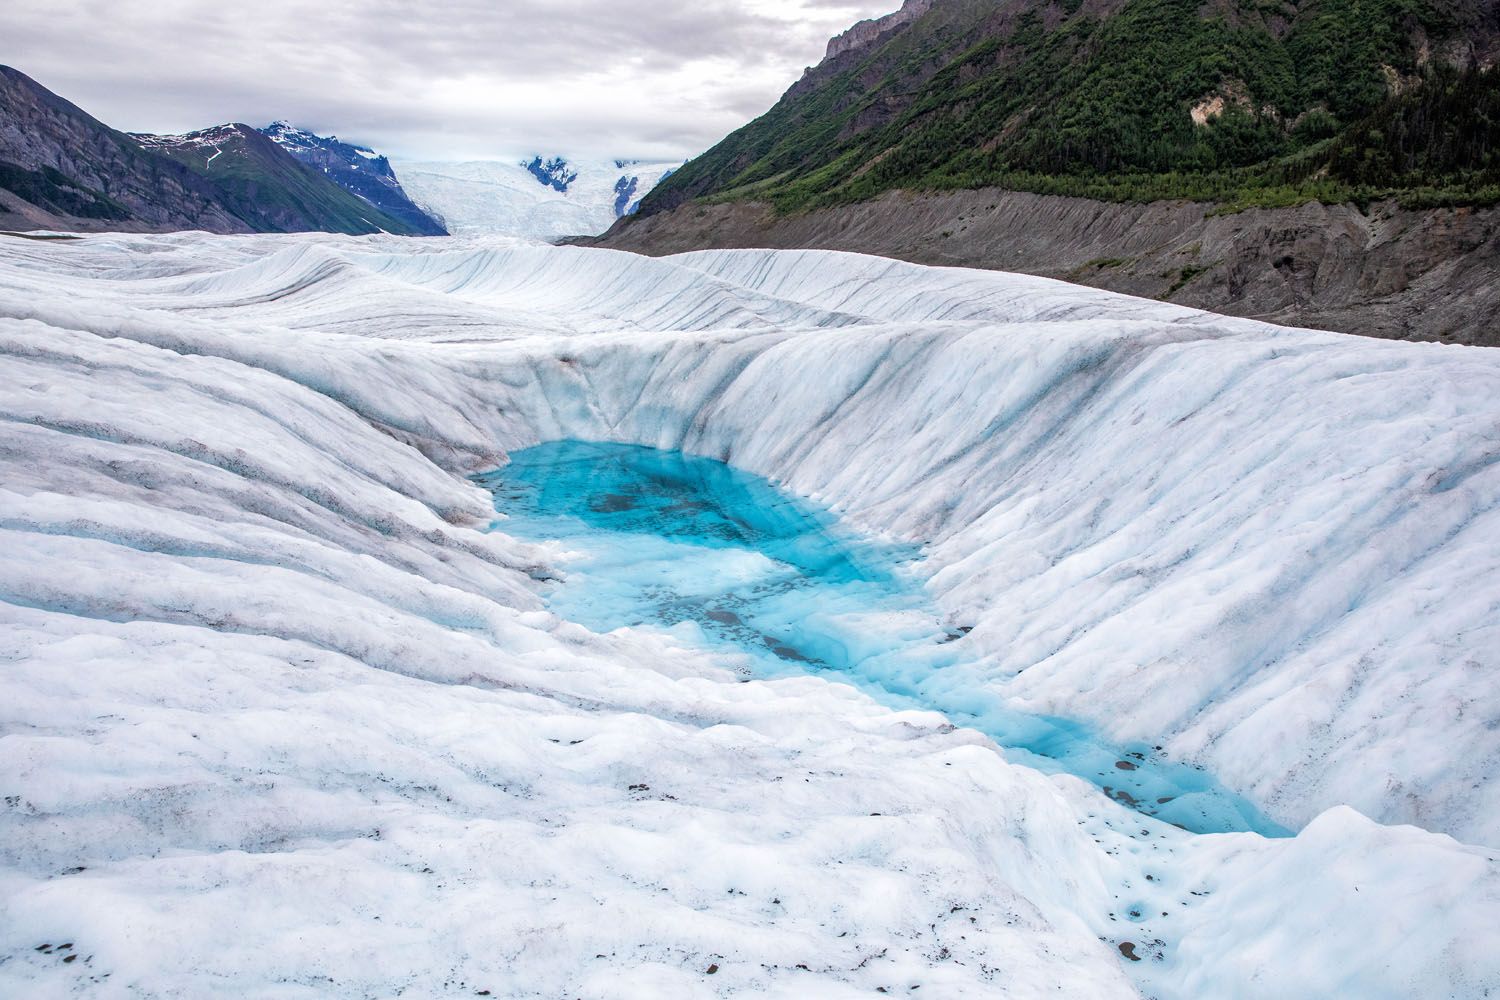 Pool of Water on the Root Glacier